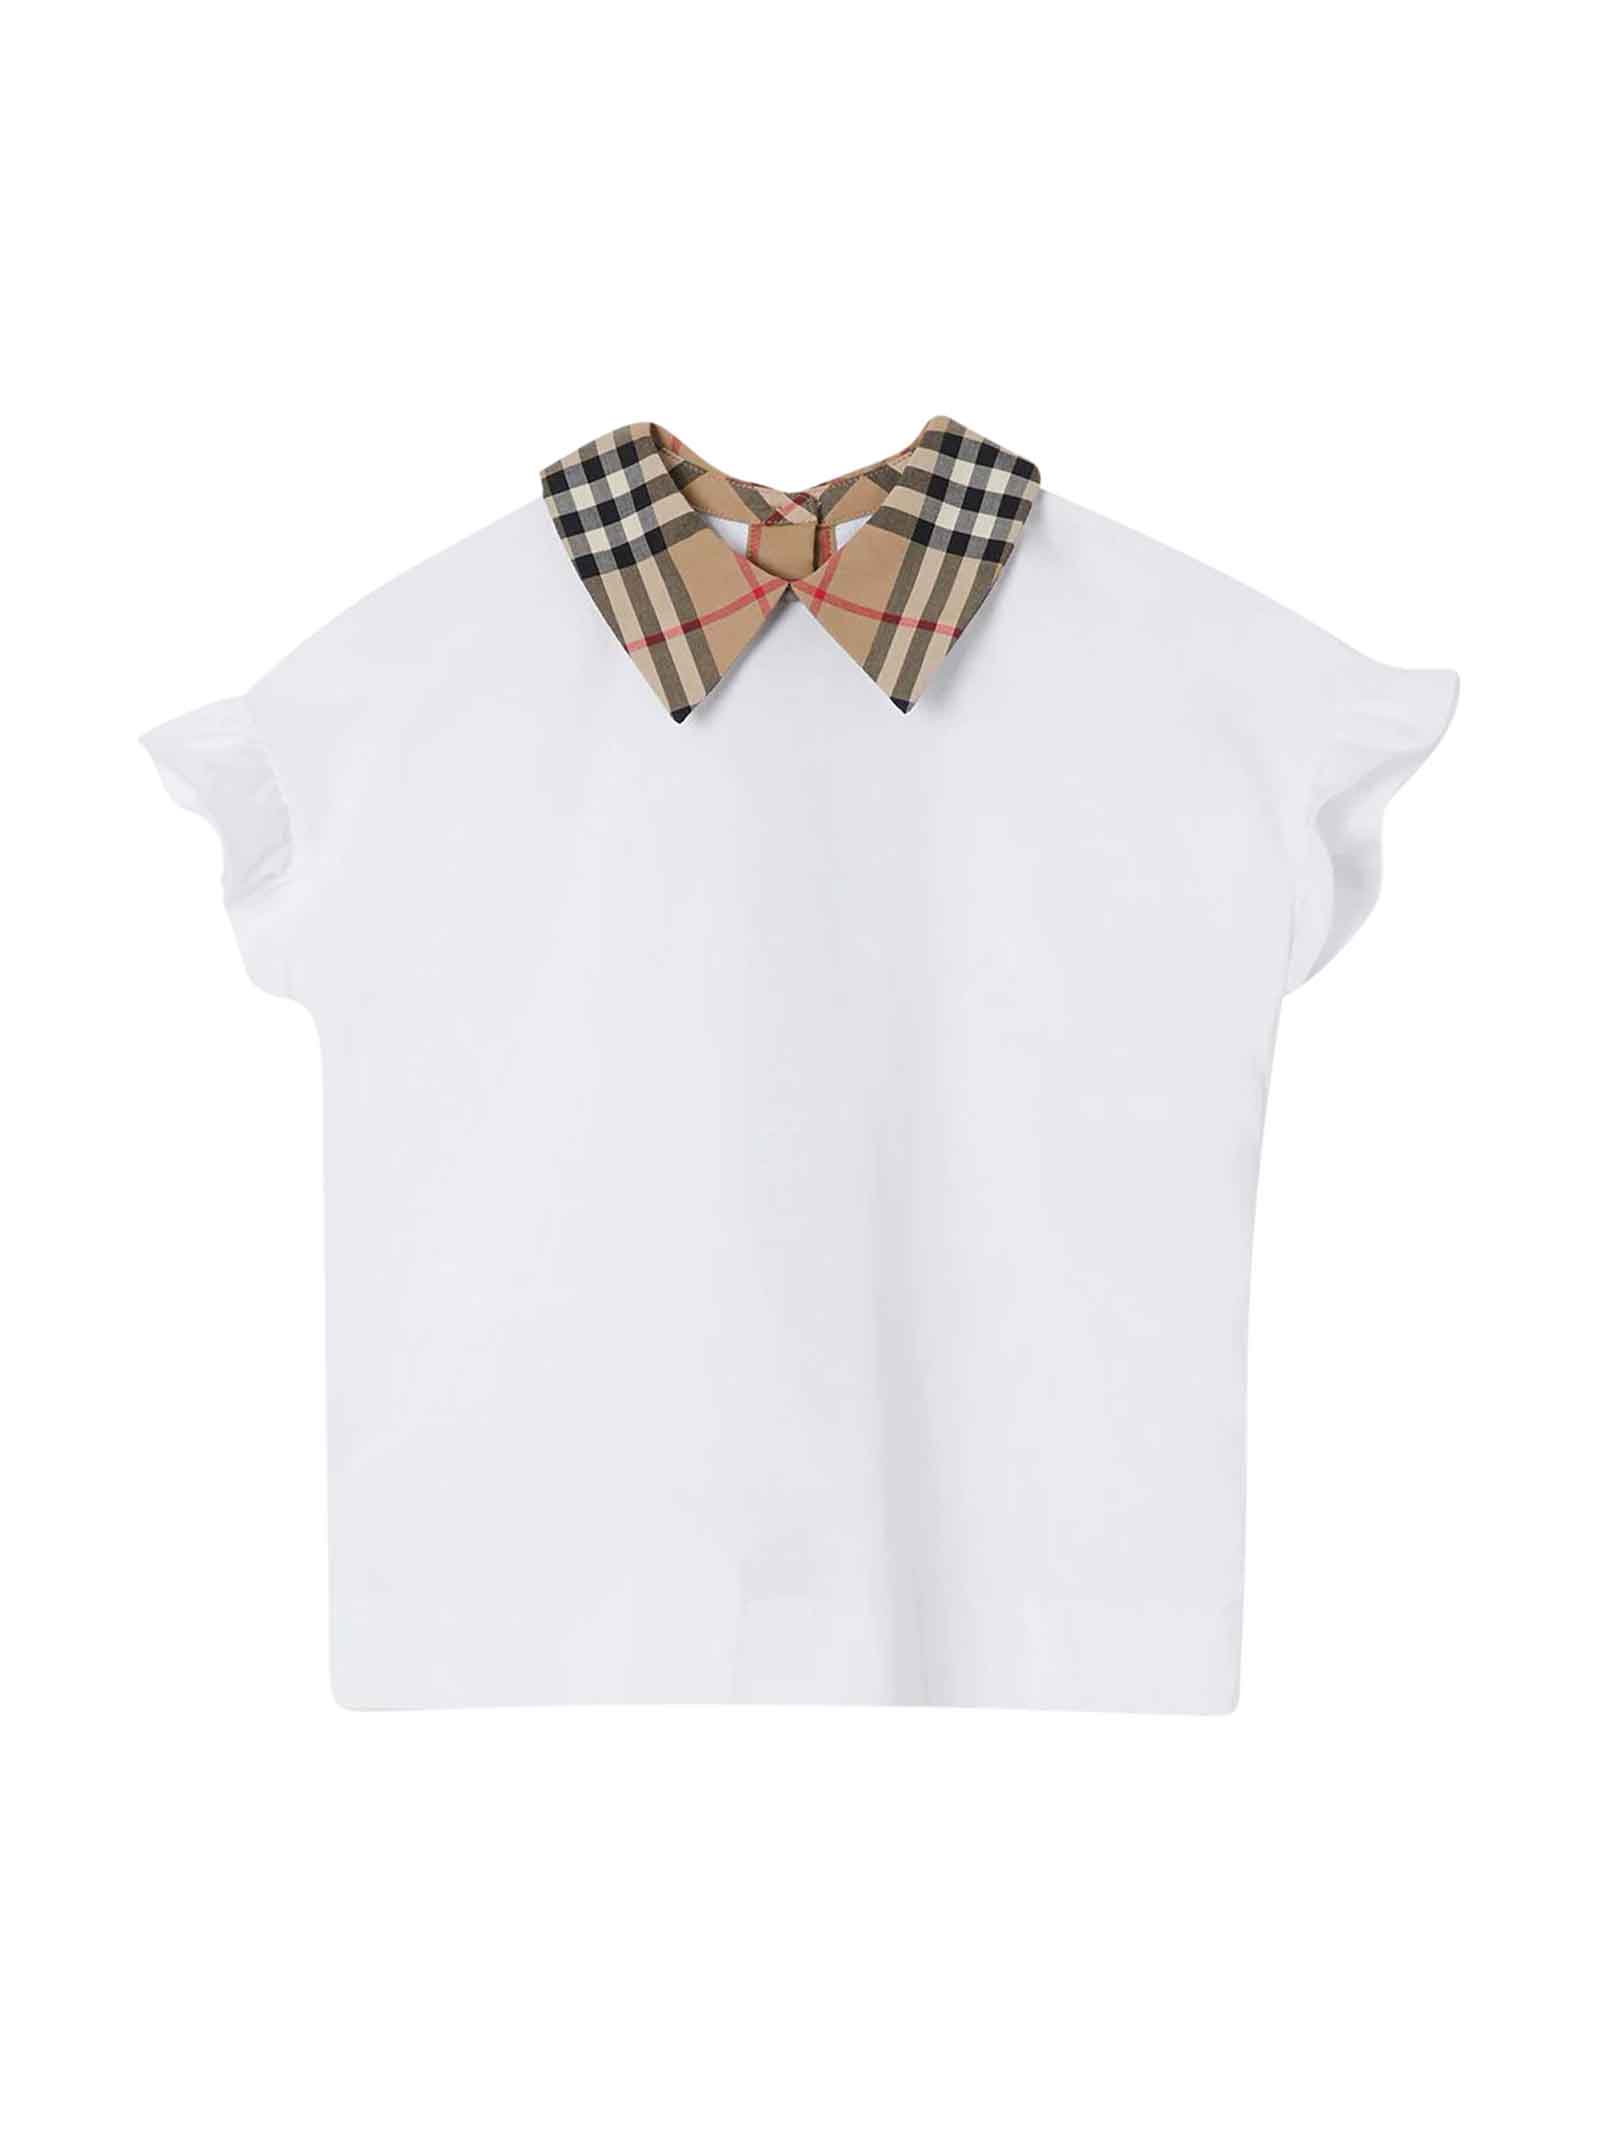 BURBERRY WHITE T-SHIRT WITH VINTAGE CHECK DETAILS,11254971